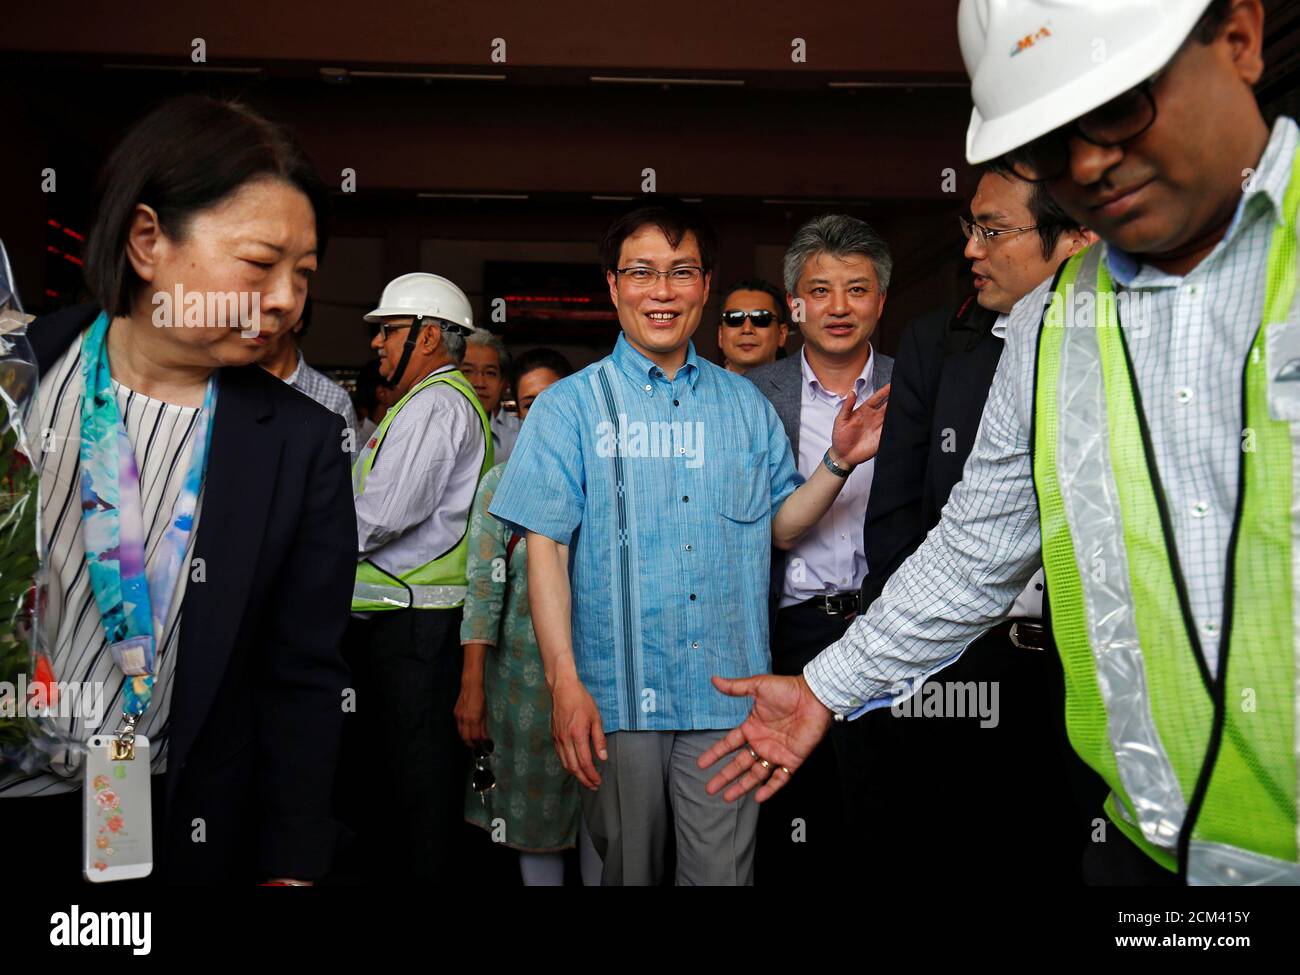 Masatoshi Akimoto, Japanese Parliamentary Vice-Minister of Land,  Infrastructure, Transport and Tourism, exits the Kalupur Railway Station,  during his visit to Ahmedabad Metro Rail Project site and Mumbai Ahmedabad  High Speed Rail (MAHSR)